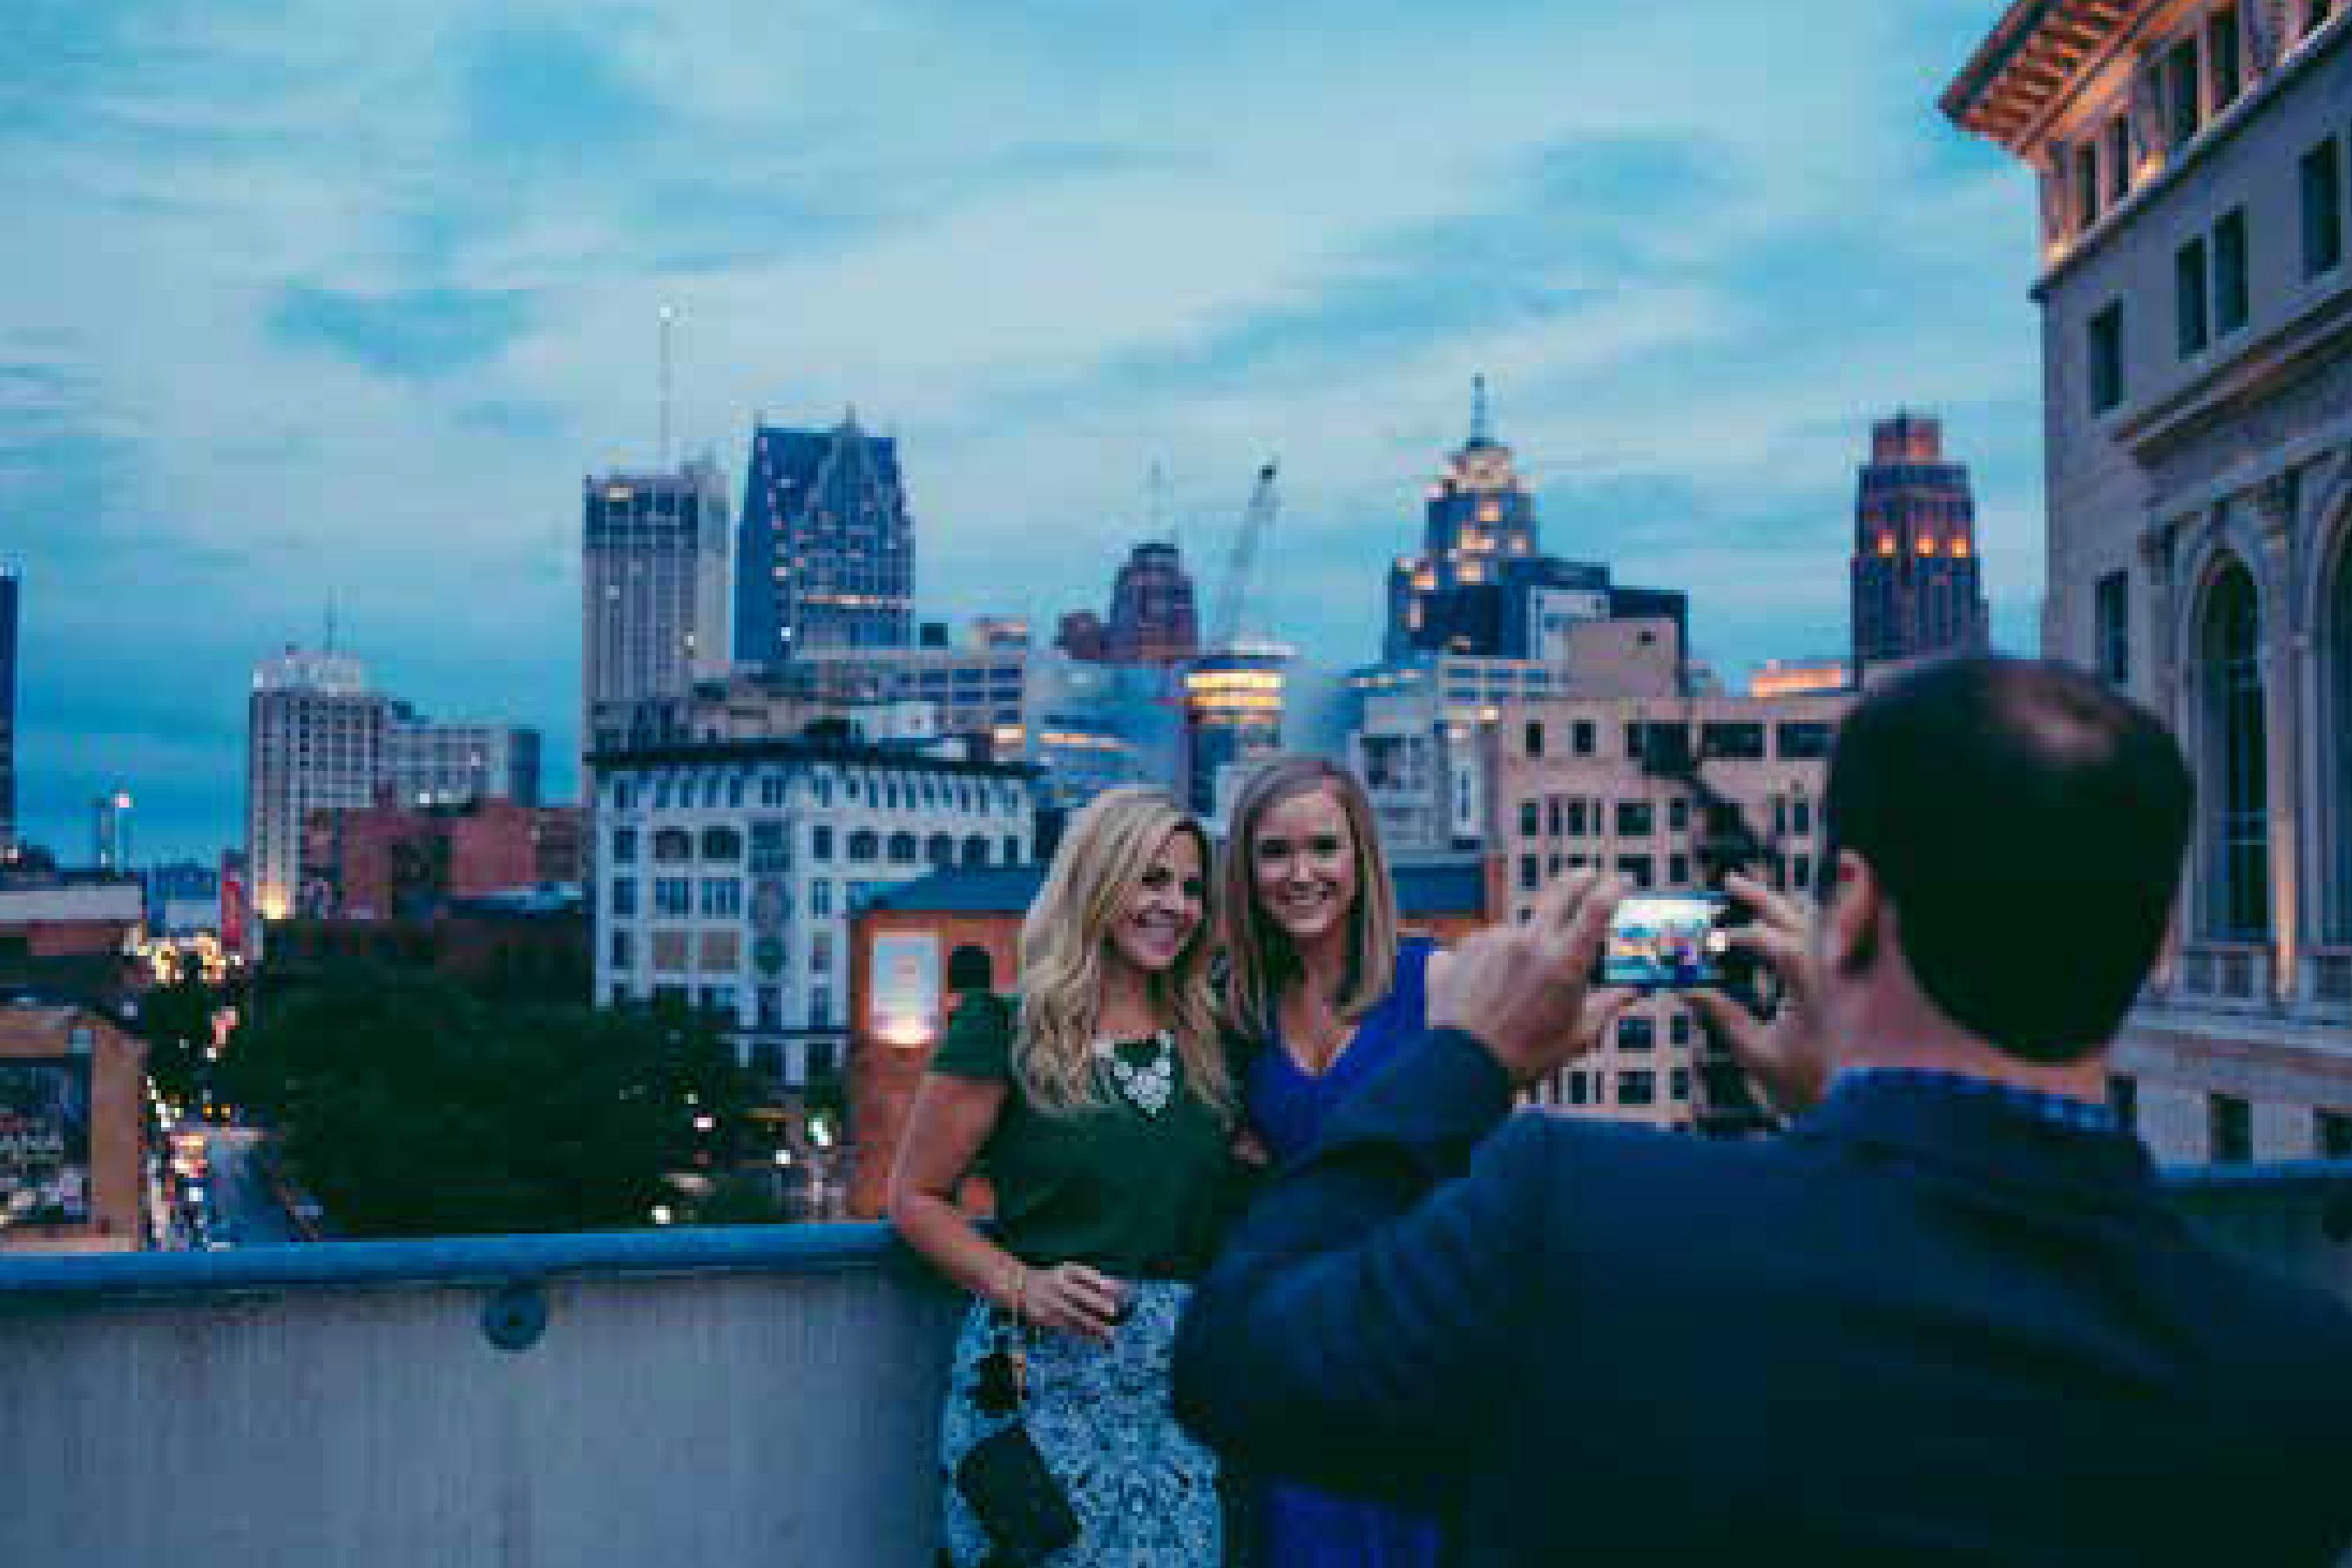 Members taking photos during a rooftop event.